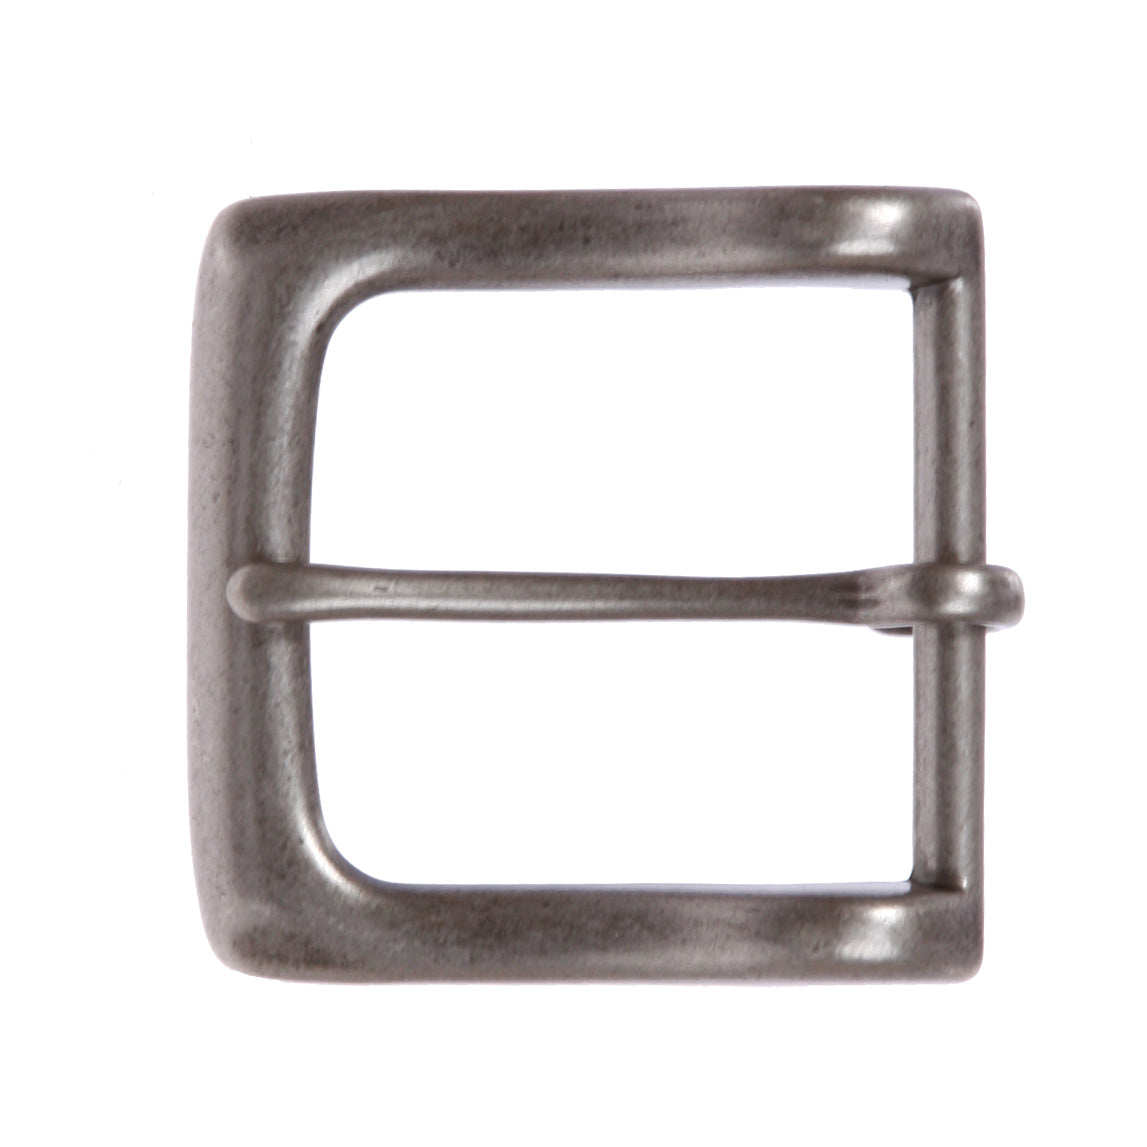 1 1/2" (40 mm) Single Prong Square Belt Buckle for replacement